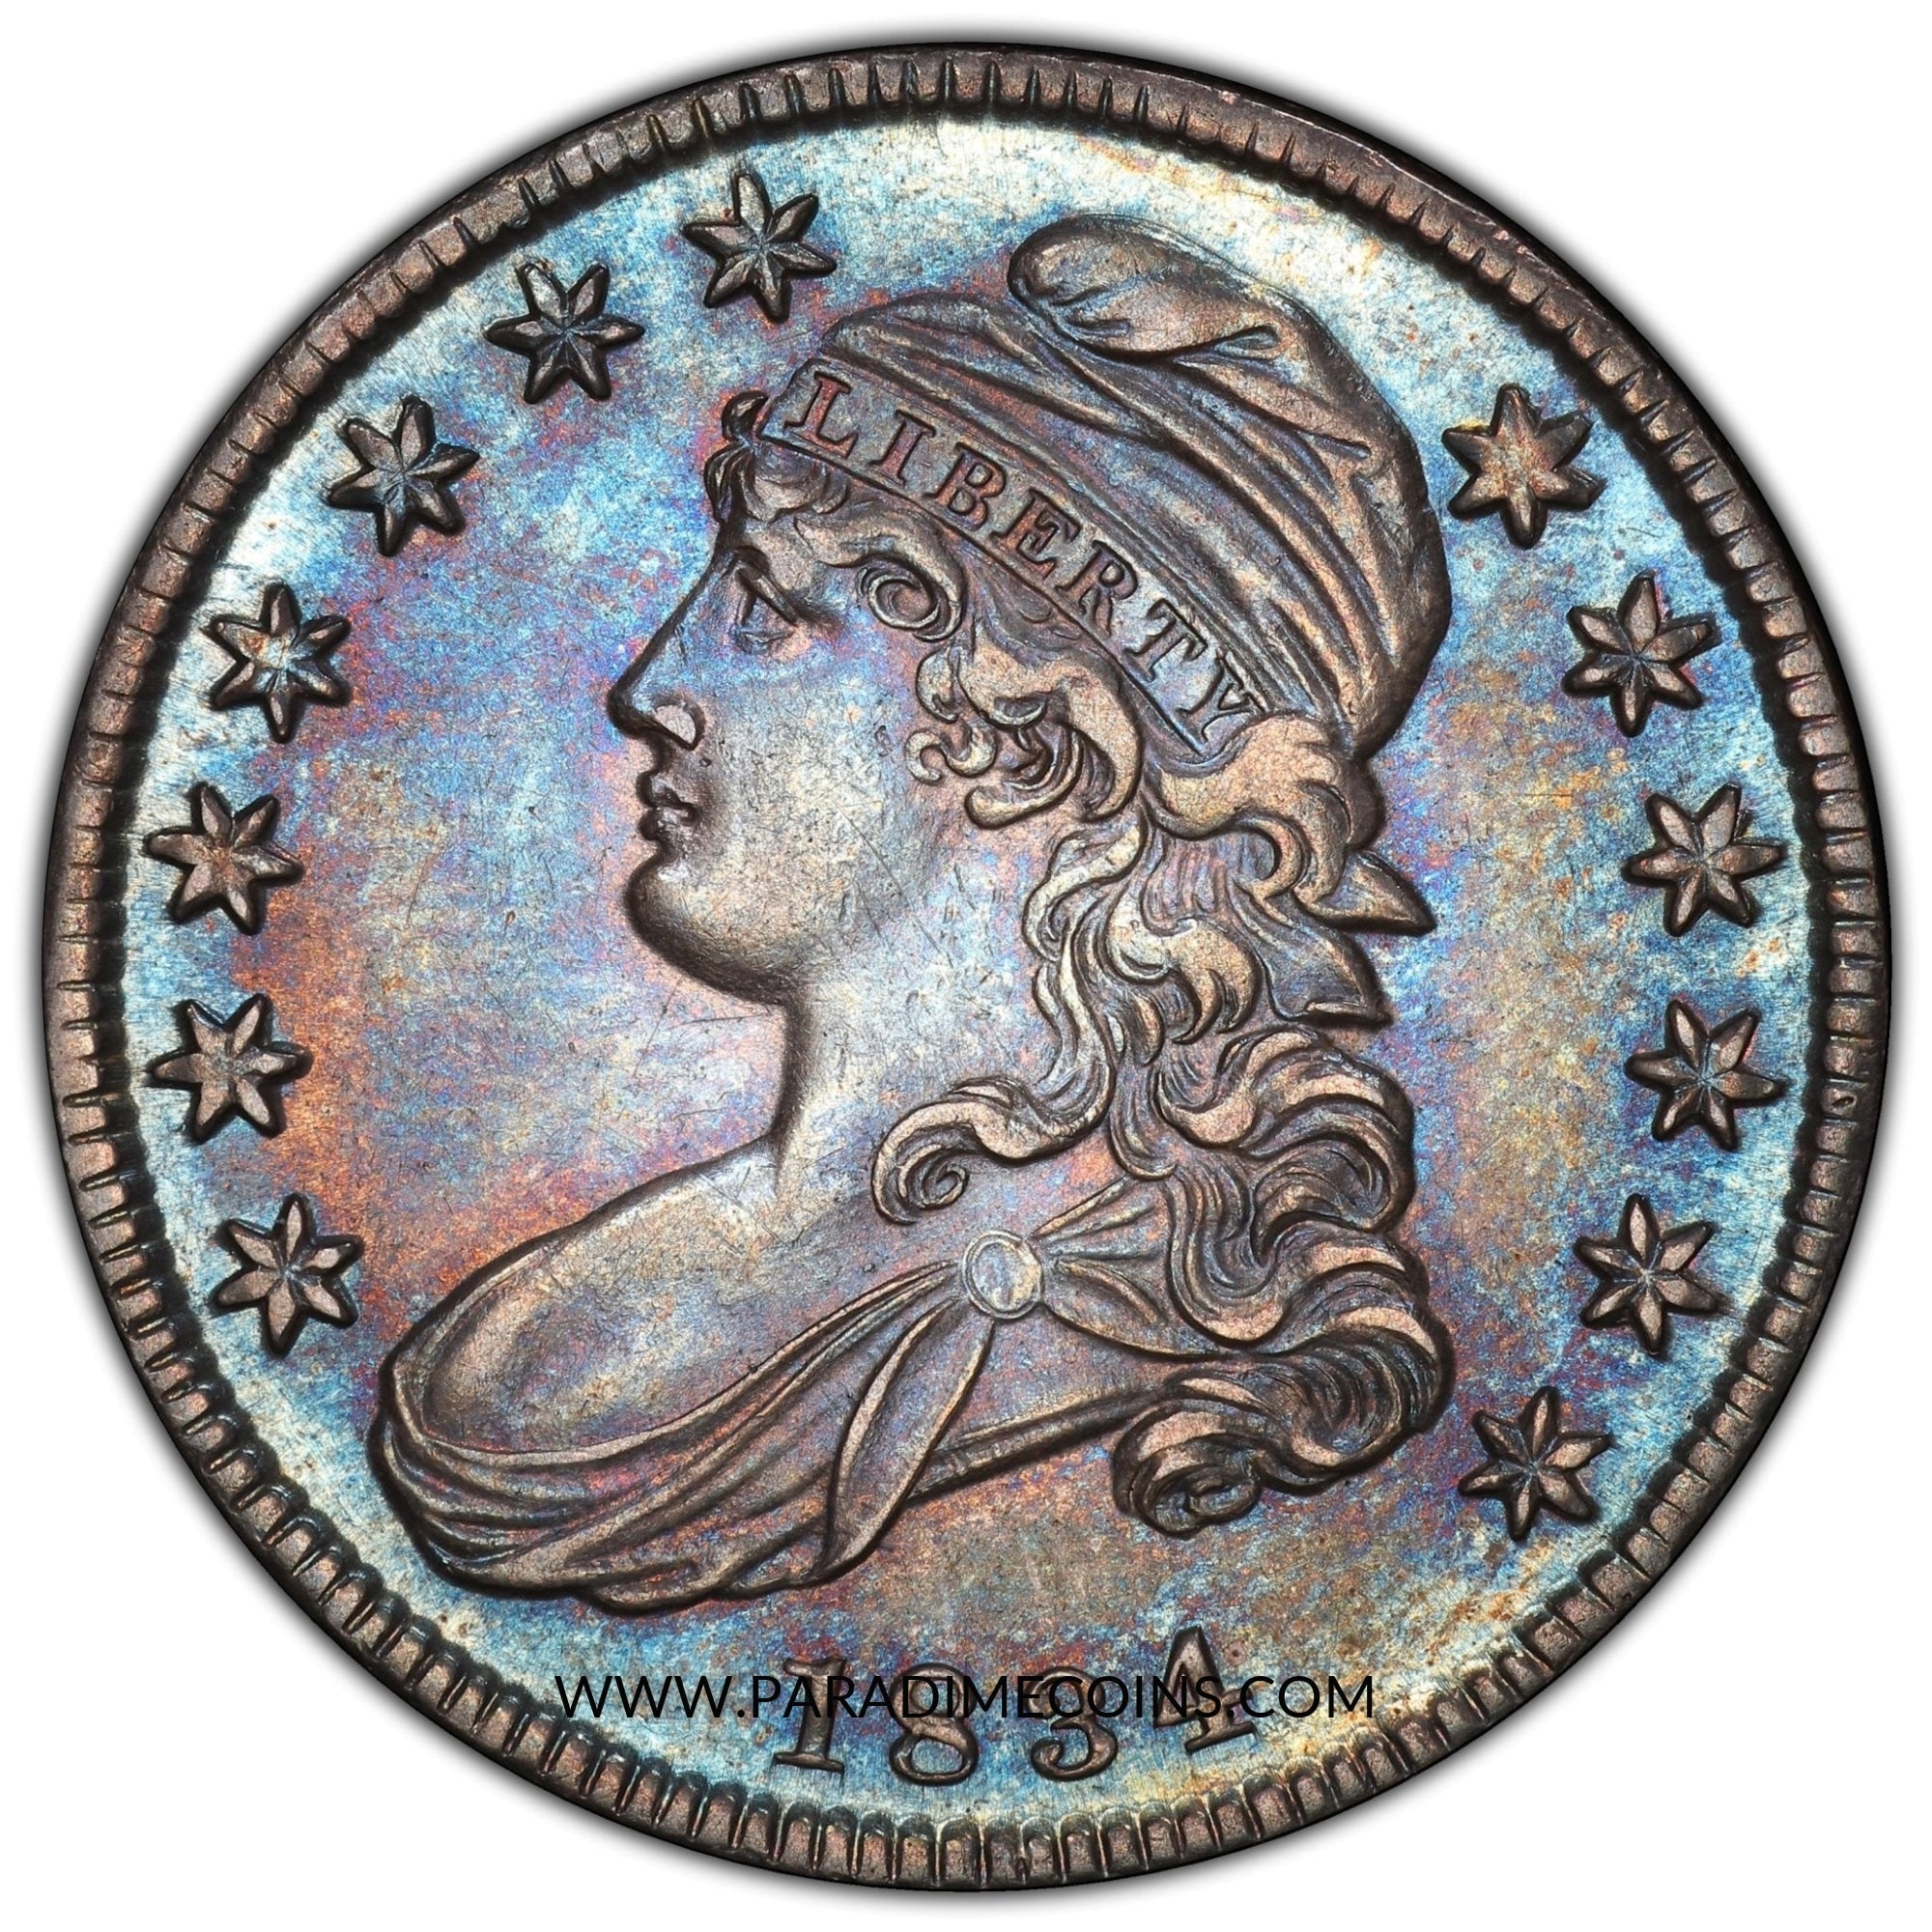 1834 50C SMALL DATE SMALL LETTERS MS62 PCGS - Paradime Coins | PCGS NGC CACG CAC Rare US Numismatic Coins For Sale